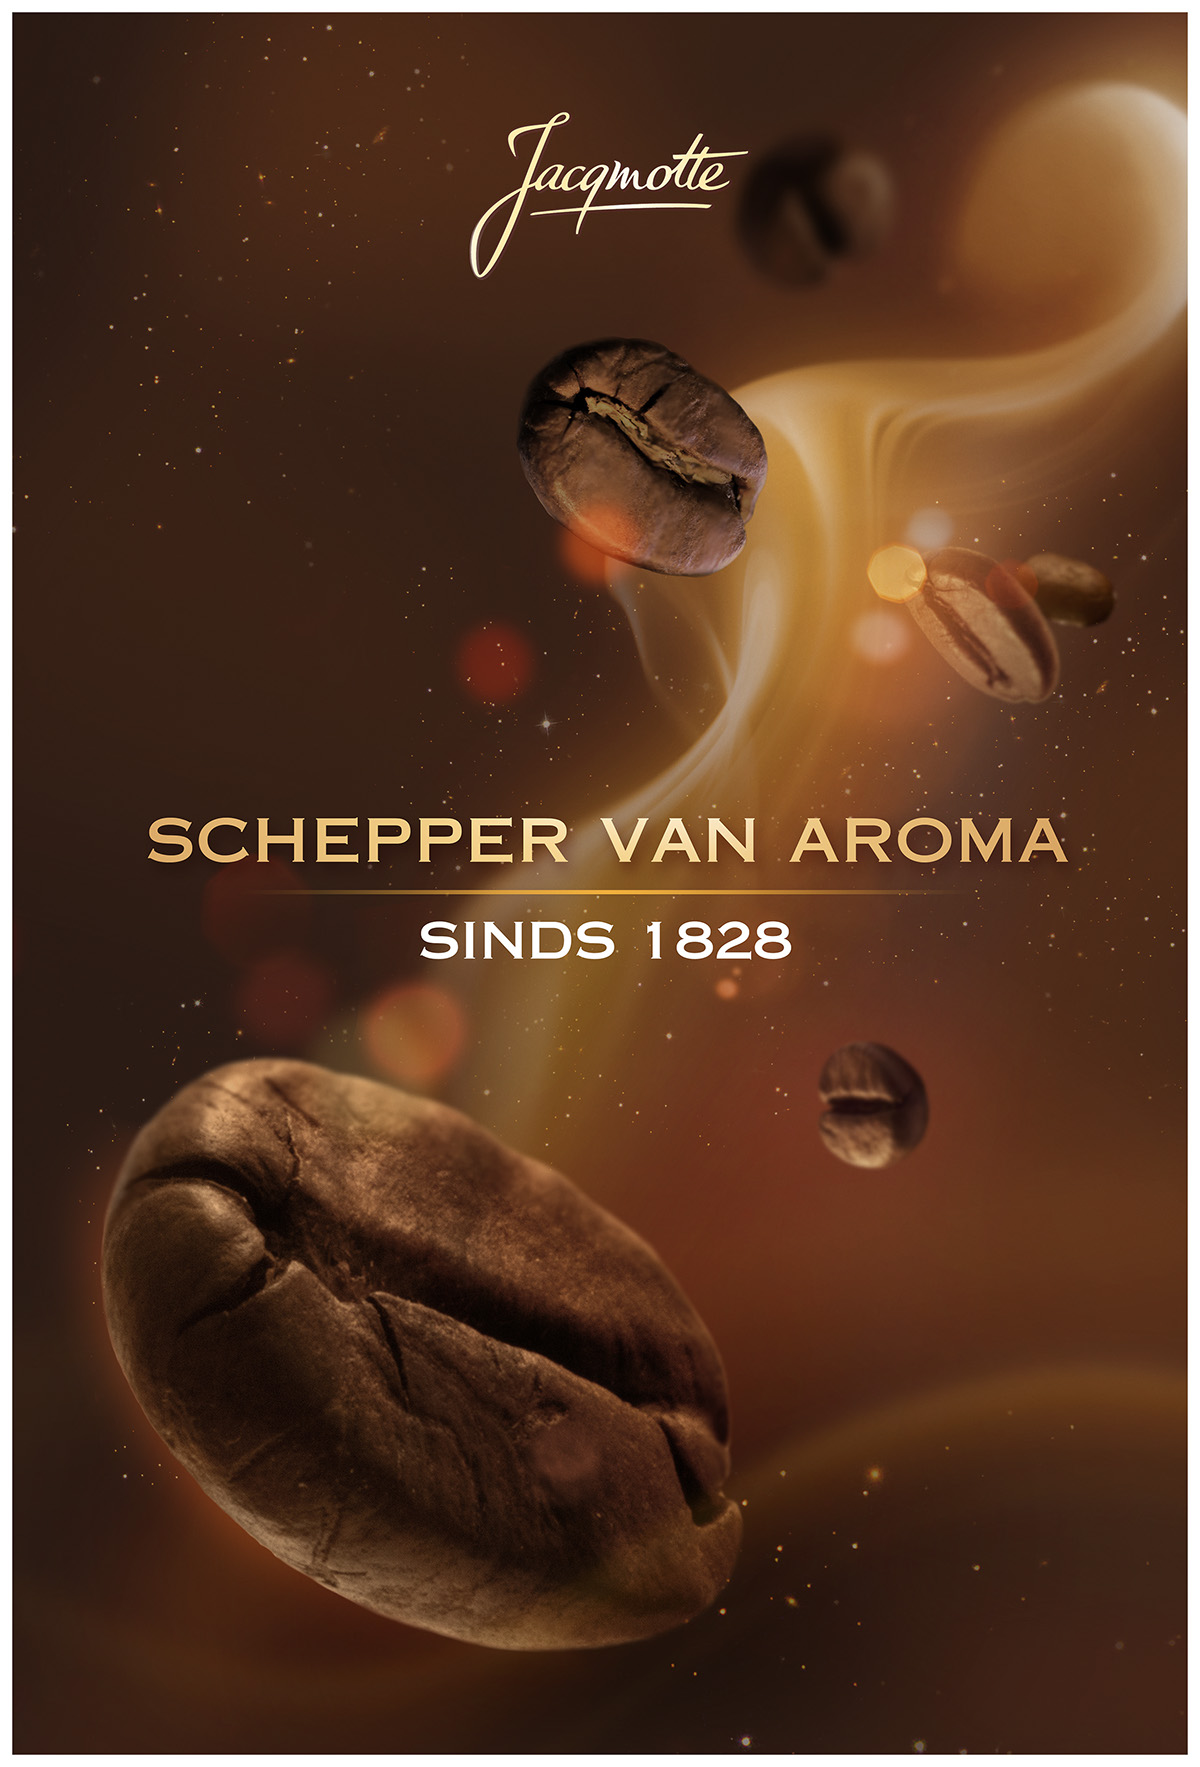 Jacqmotte  coffee komkom doorn poster campaign